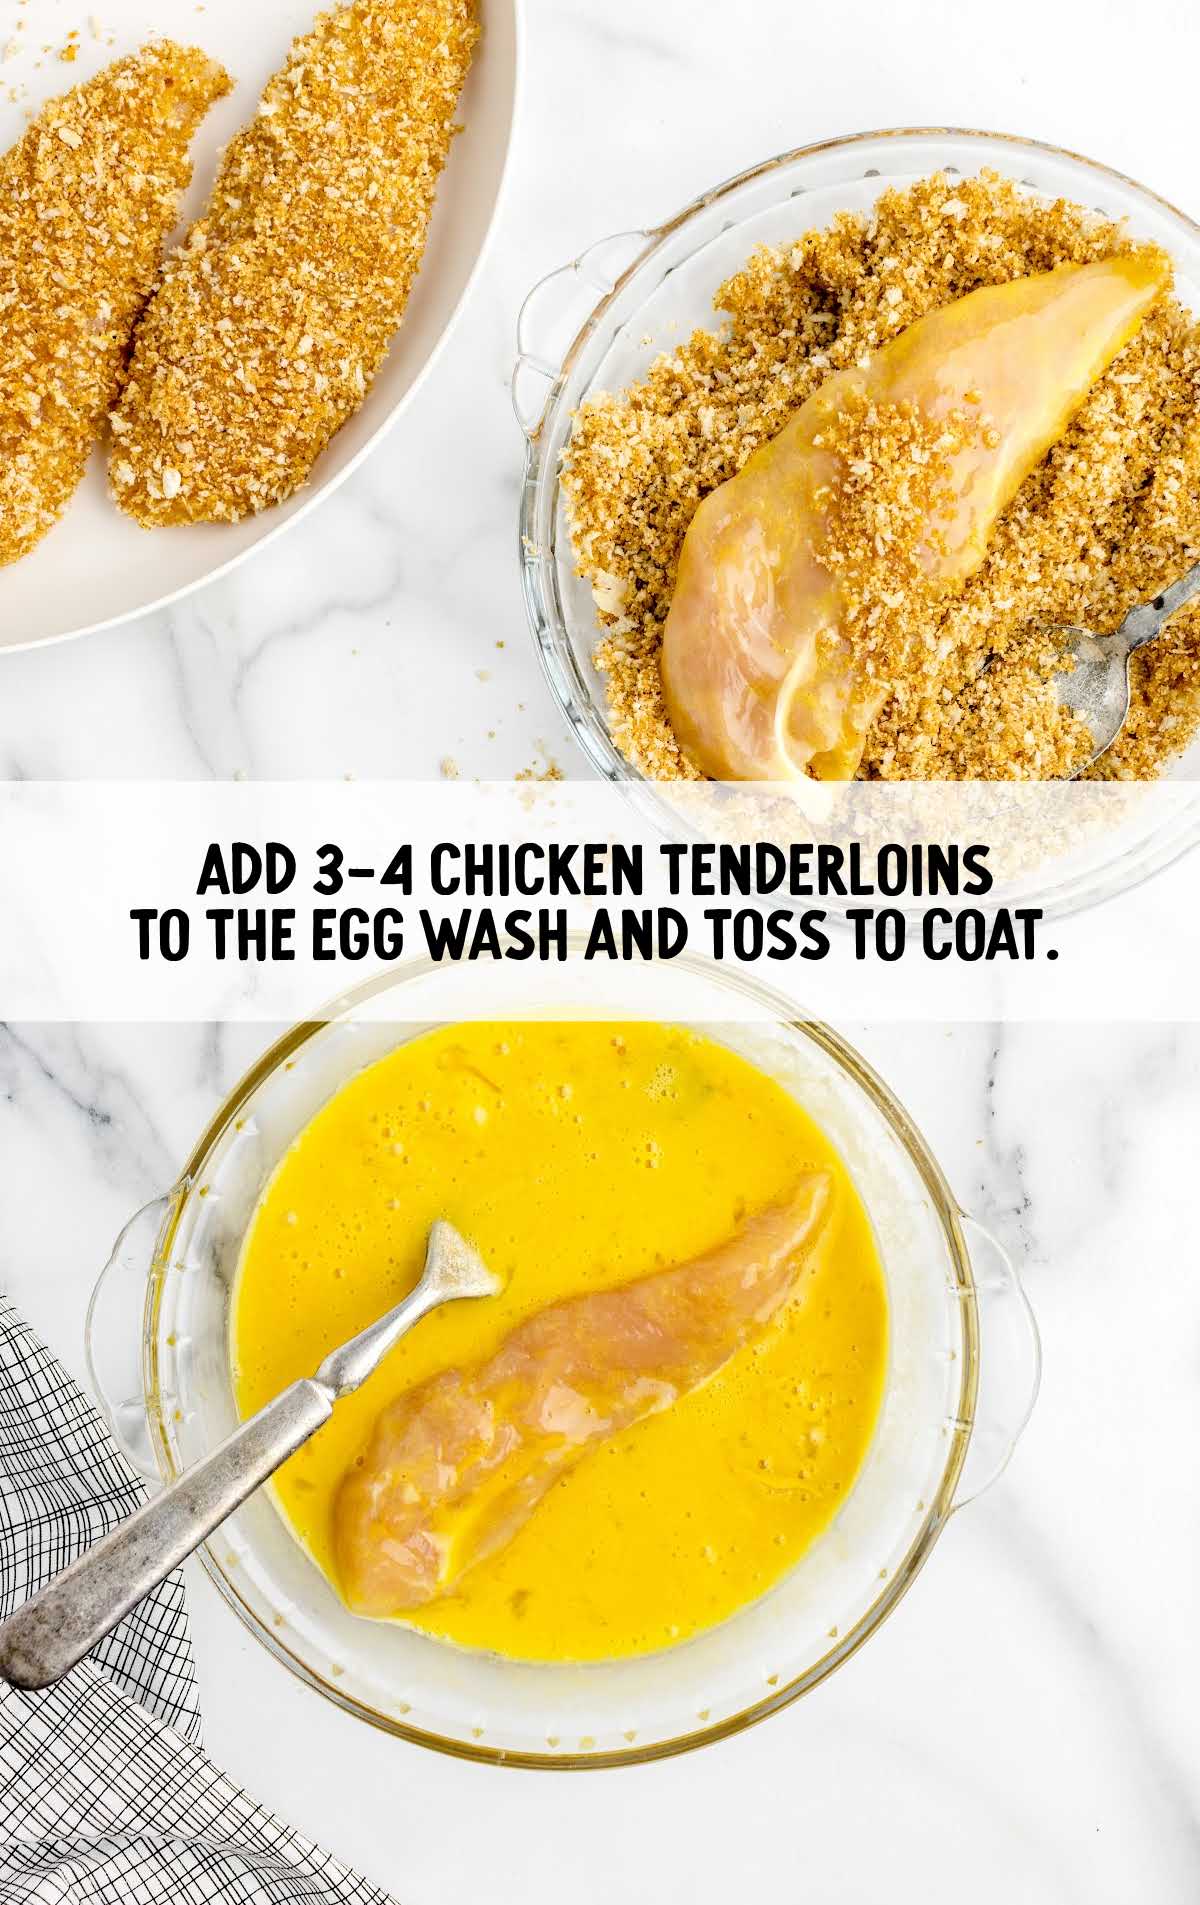 Chicken Tenderloins coated in the egg wash in a bowl